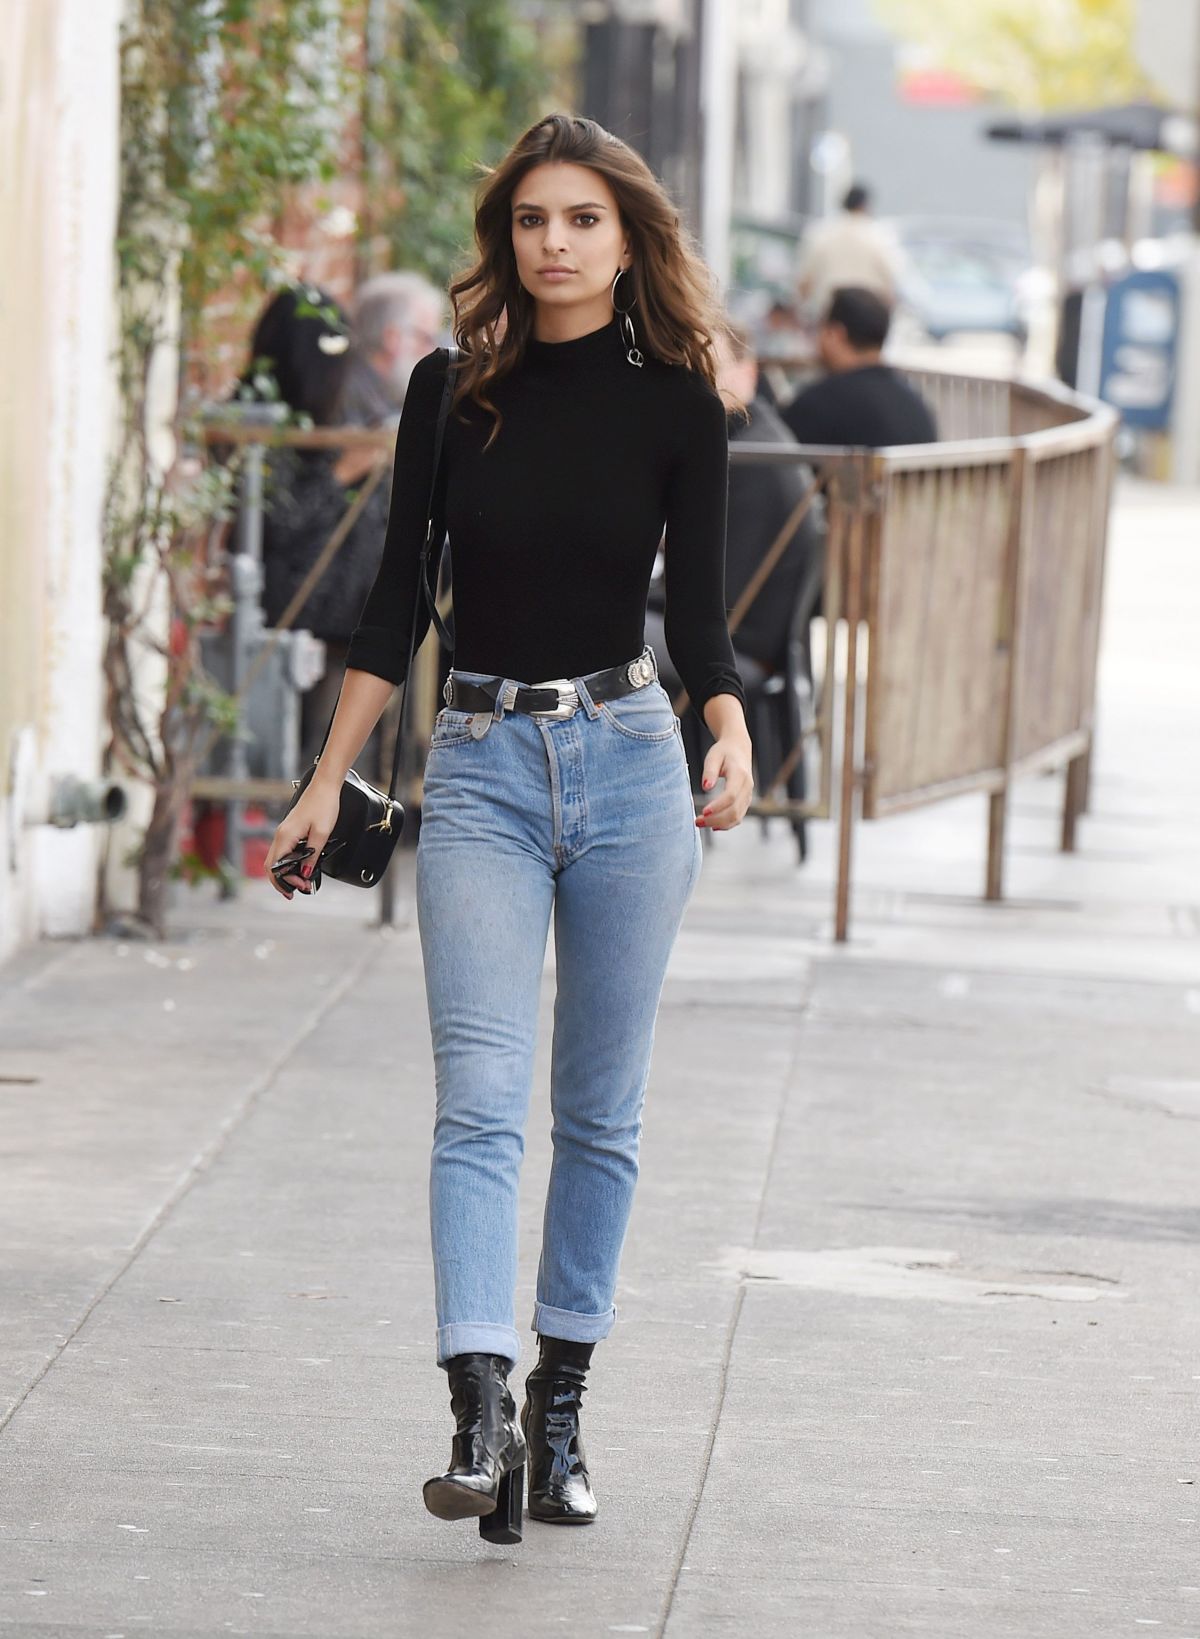 EMILY RATAJKOWSKI in Jeans Out and About in Los Angeles 12/06/2016 ...